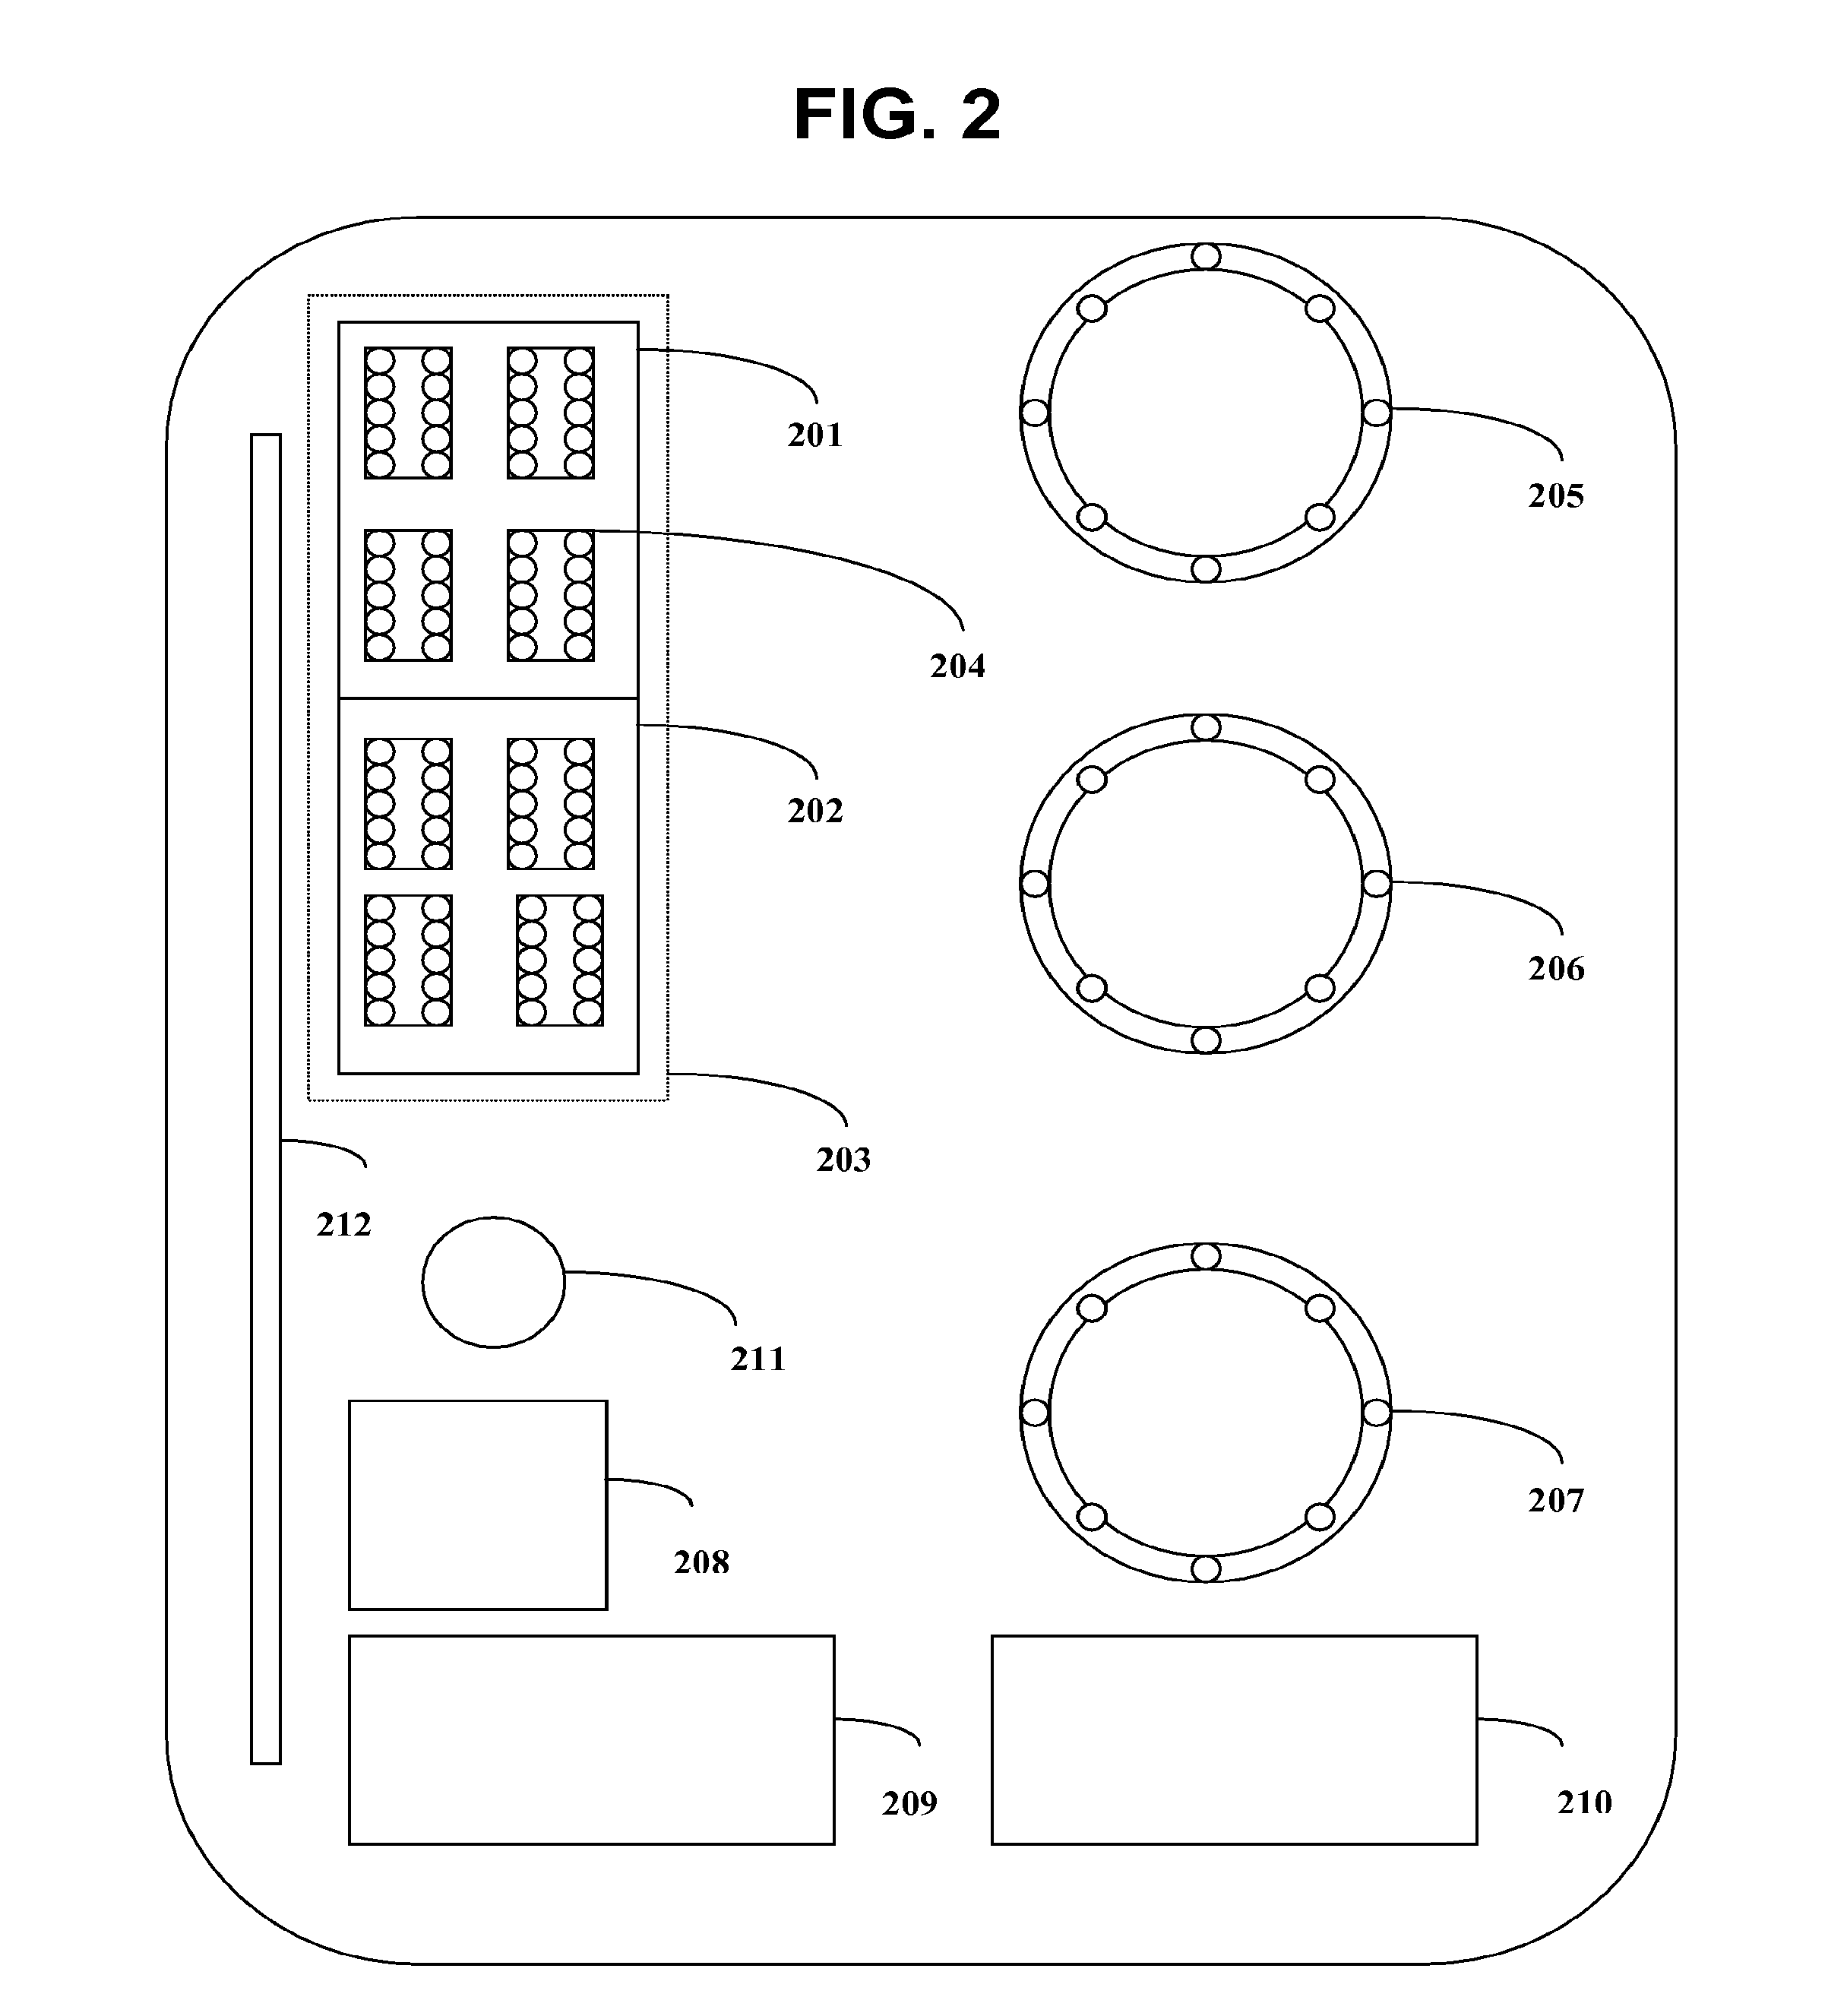 Method for scheduling samples in a combinational clinical analyzer